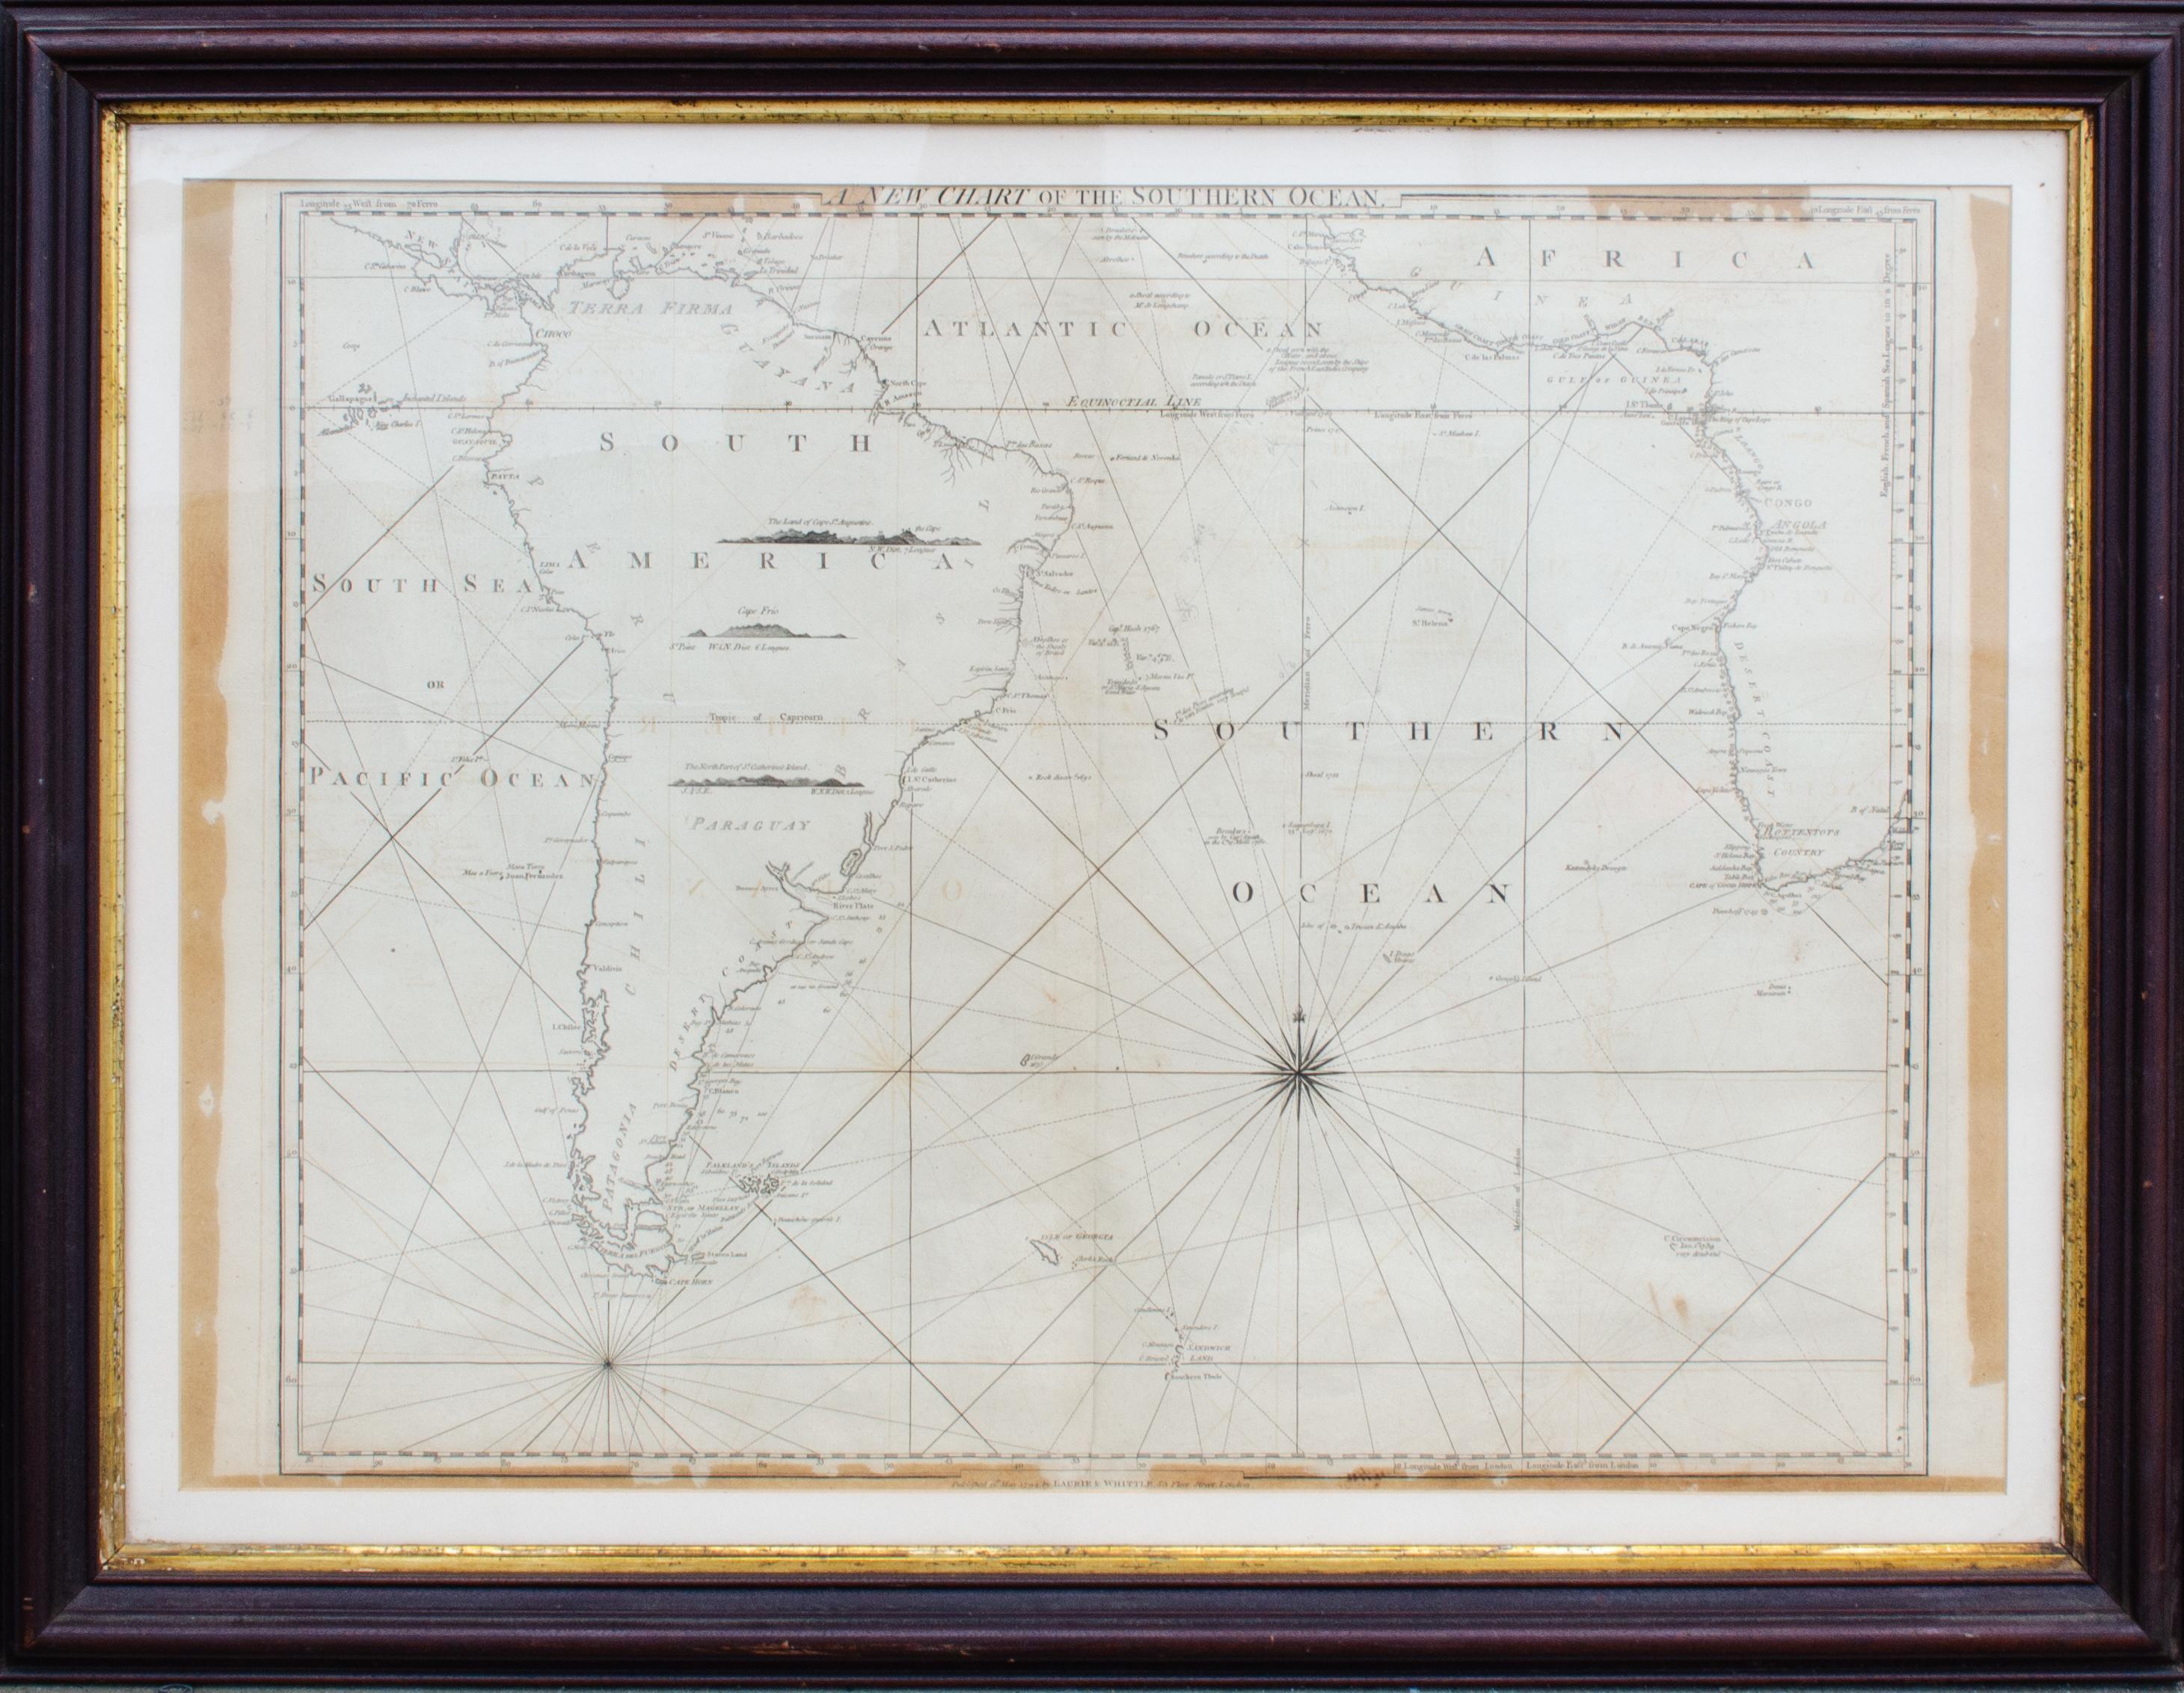 Unknown Figurative Print - Antique Map of the Southern Oceans, South America and Africa